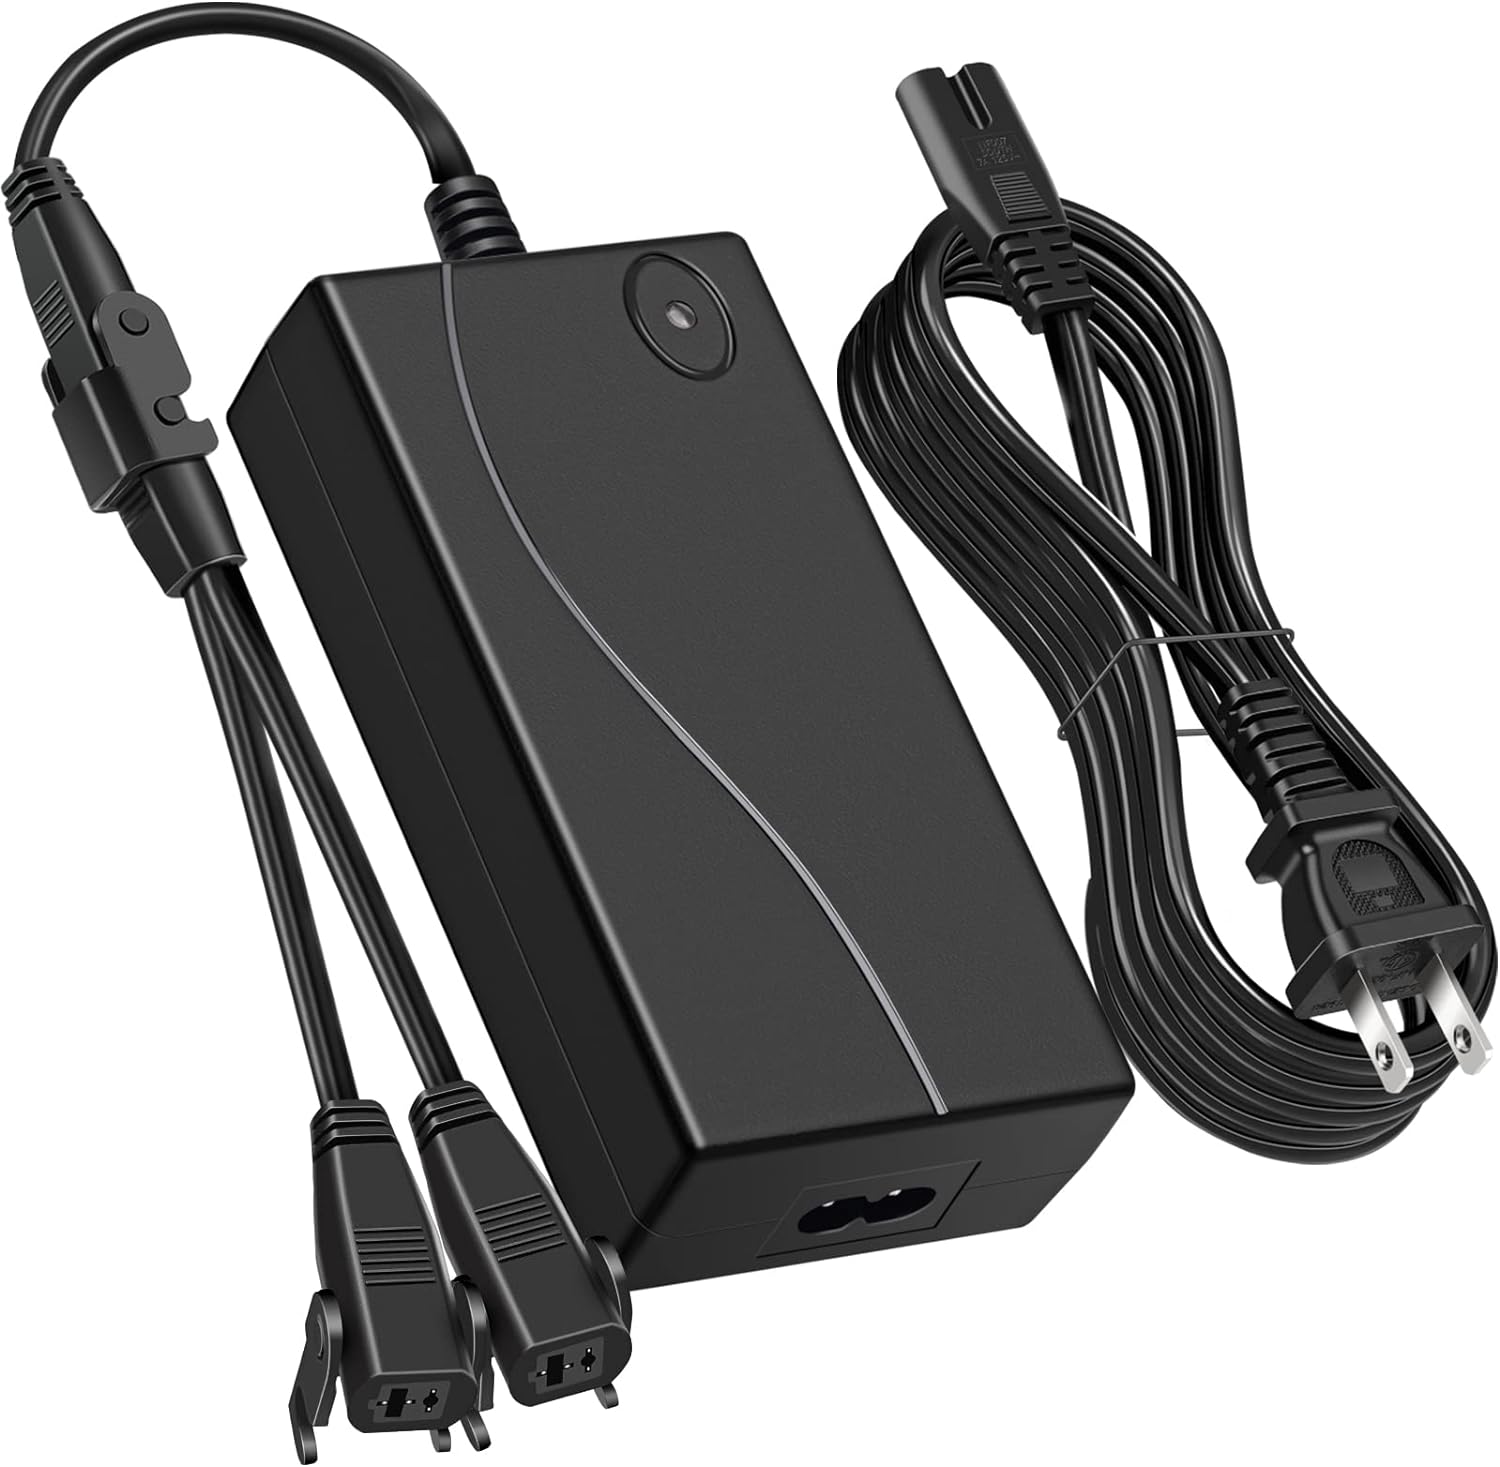 Recliner Power Supply with 2 Pin Splitter Lead Y Cable Power 2 Motors Connector Type 2-Pin Compatible Devices Laptops I